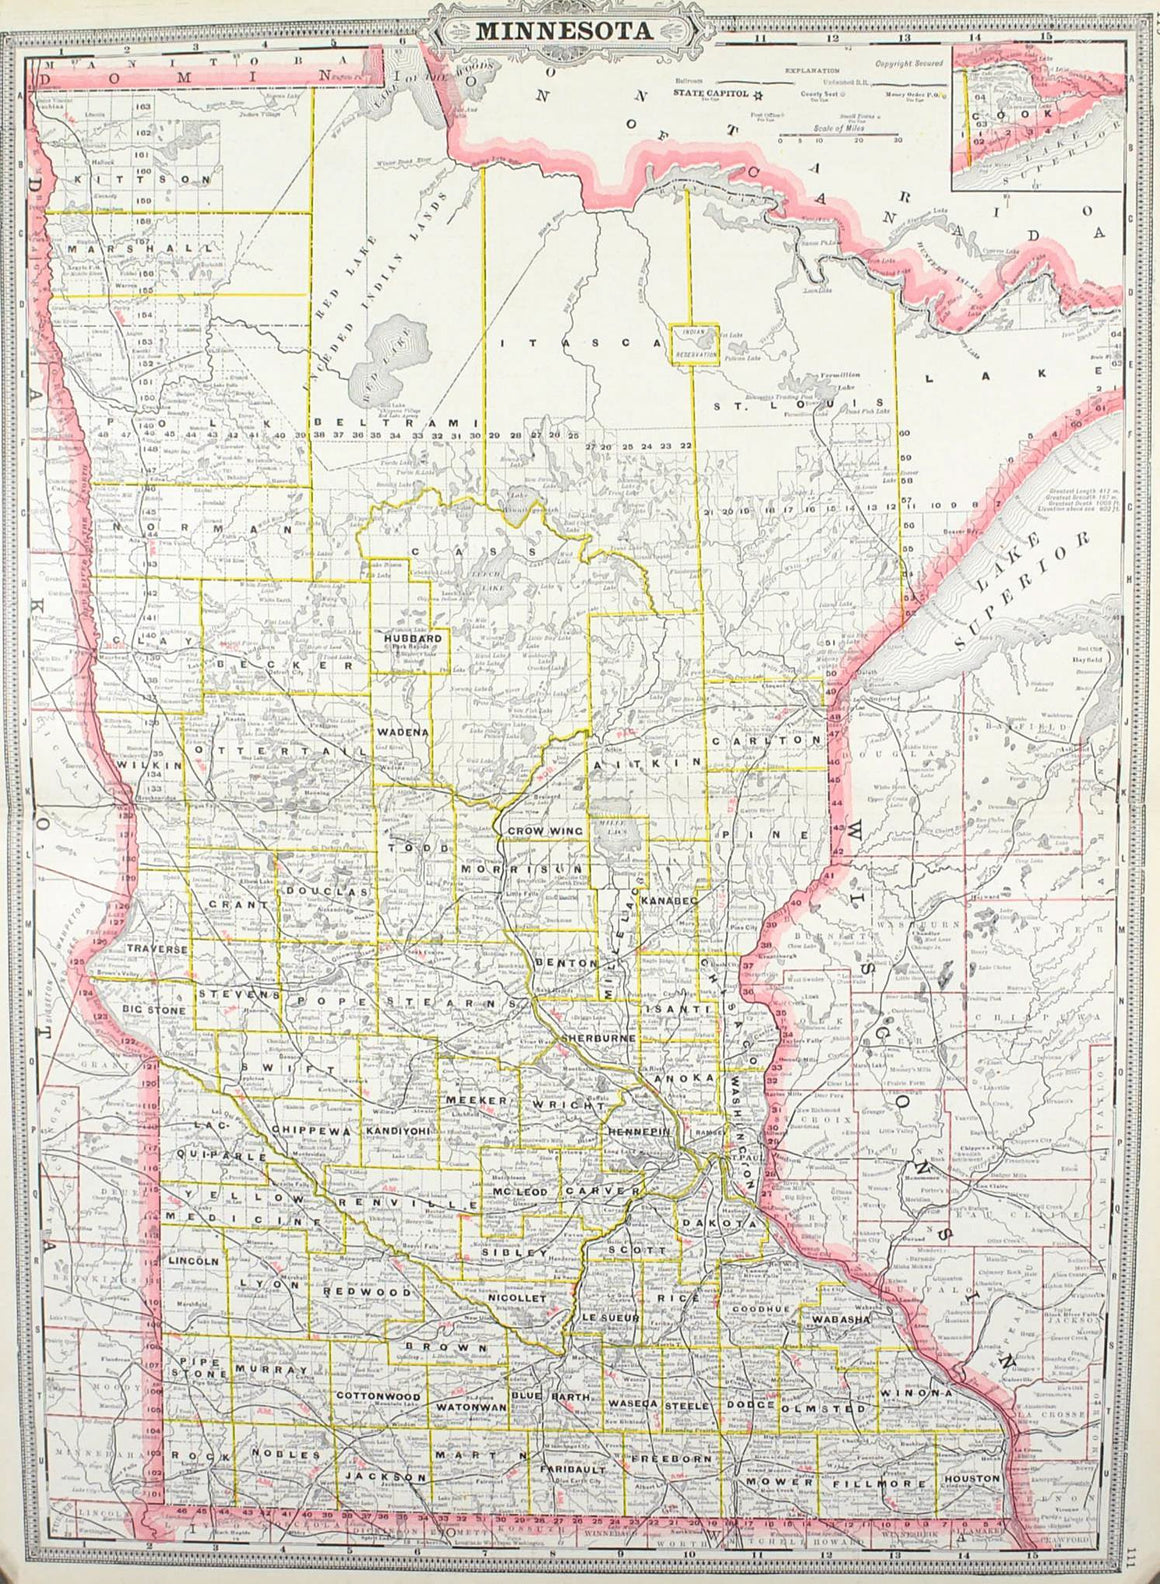 1887 Railroad and County Map of Minnesota